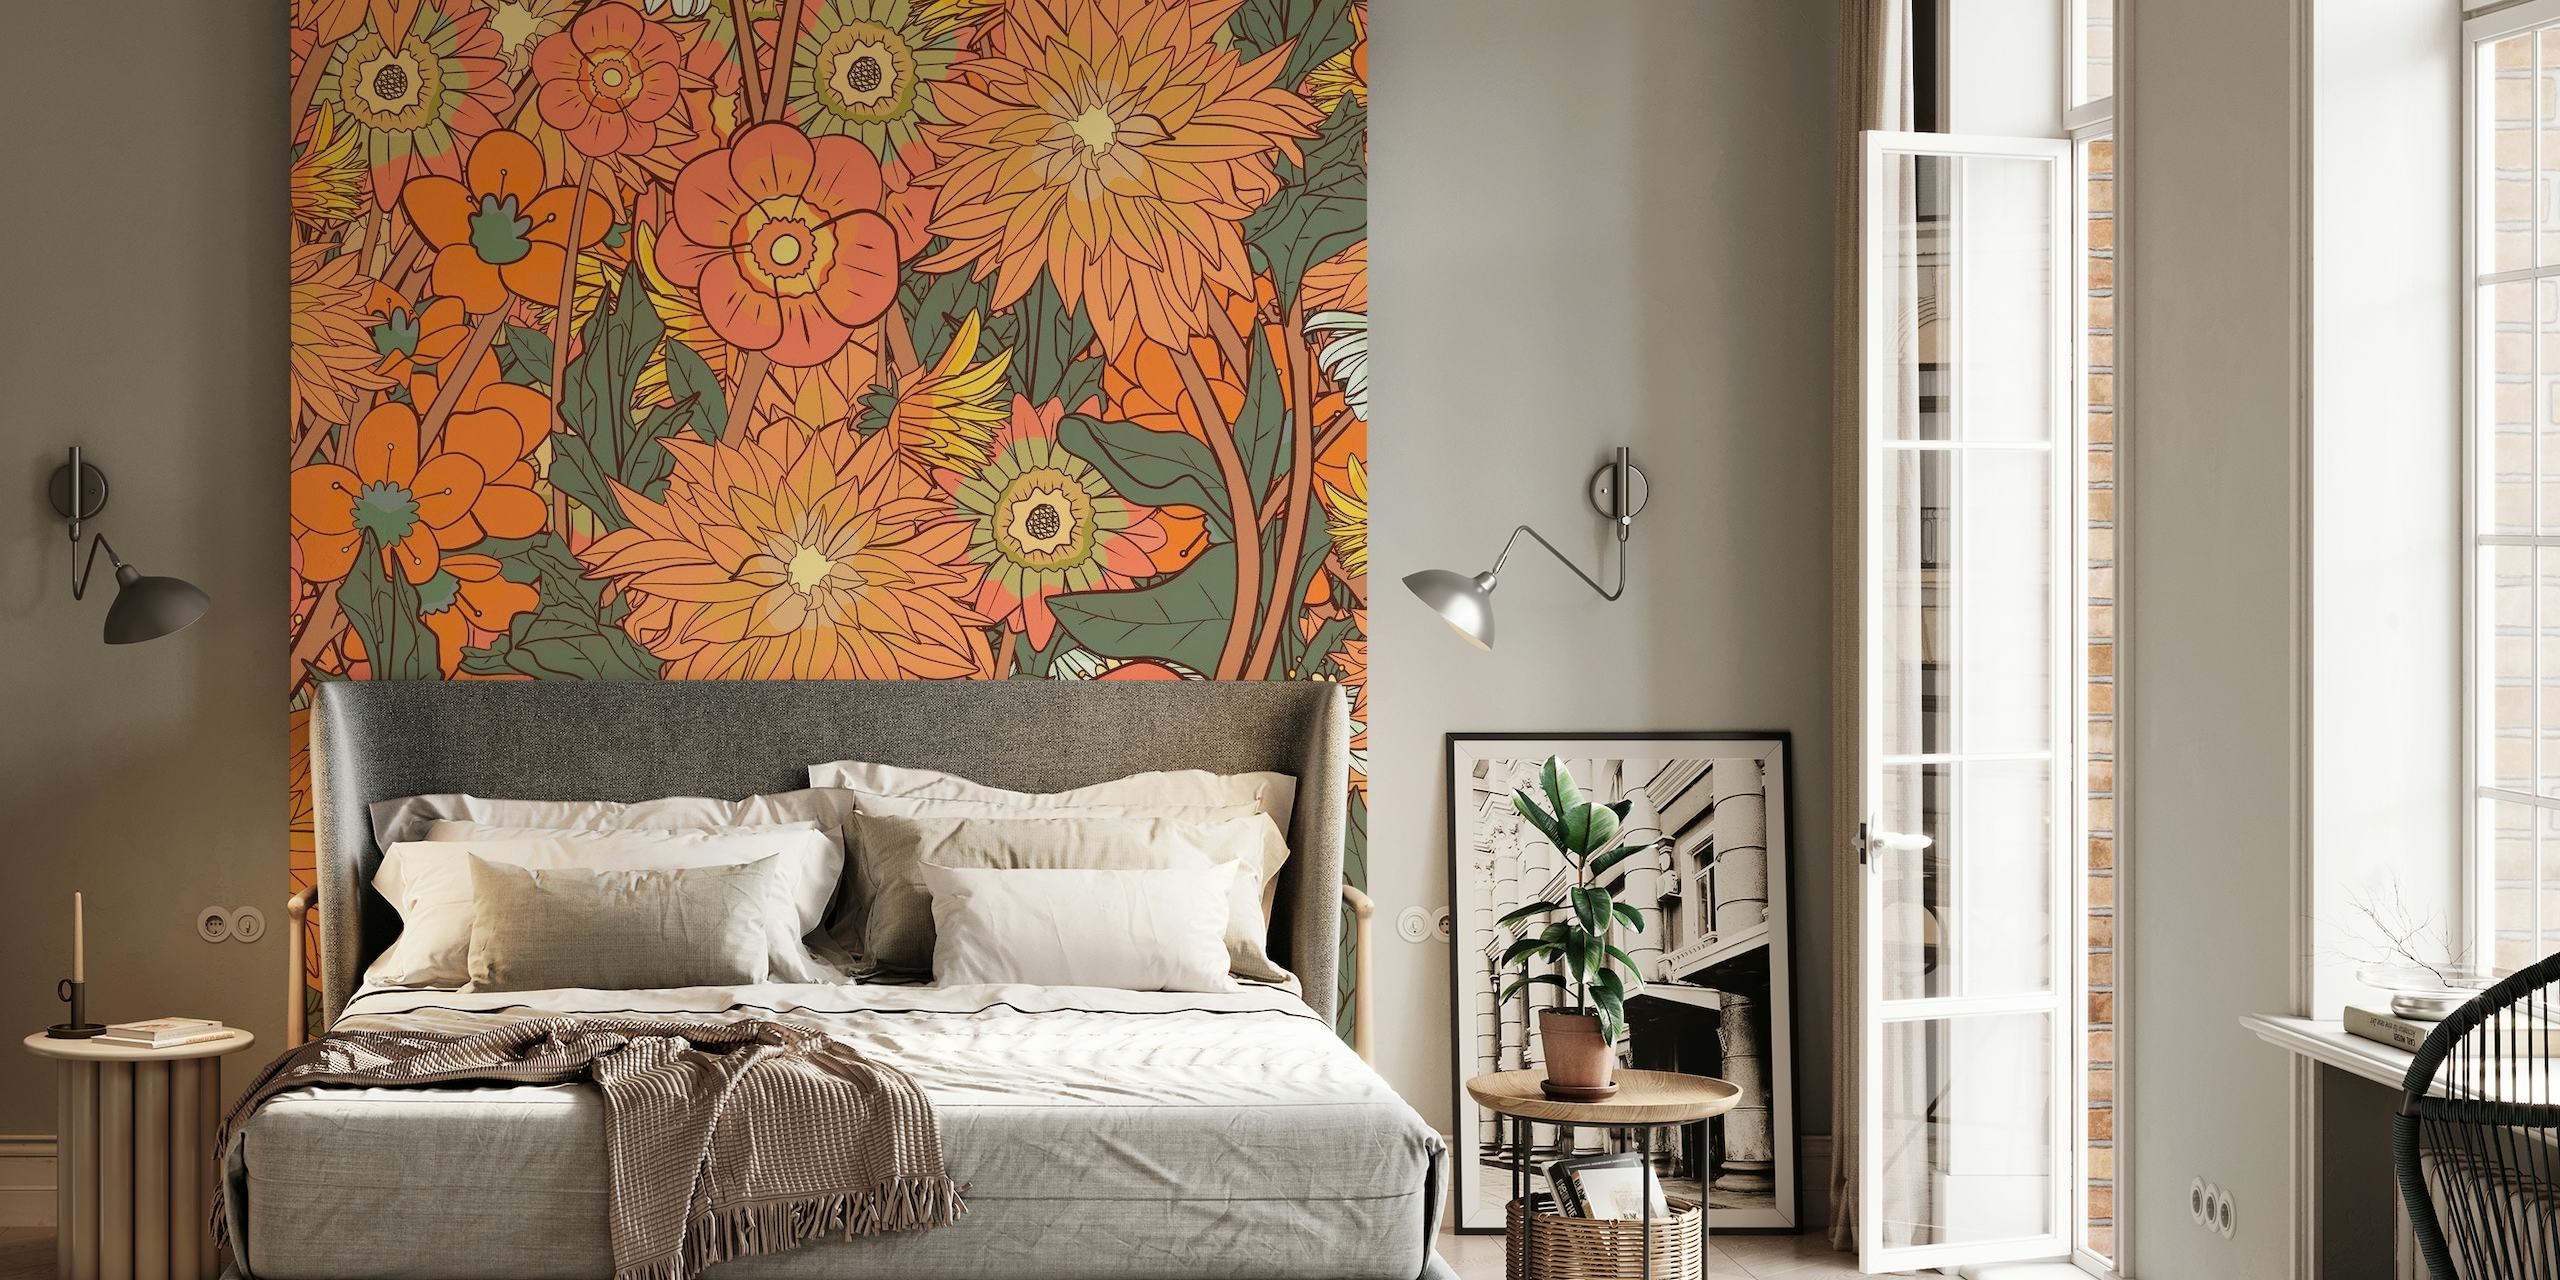 Wall mural of a blooming field with yellow and orange flowers and green foliage.